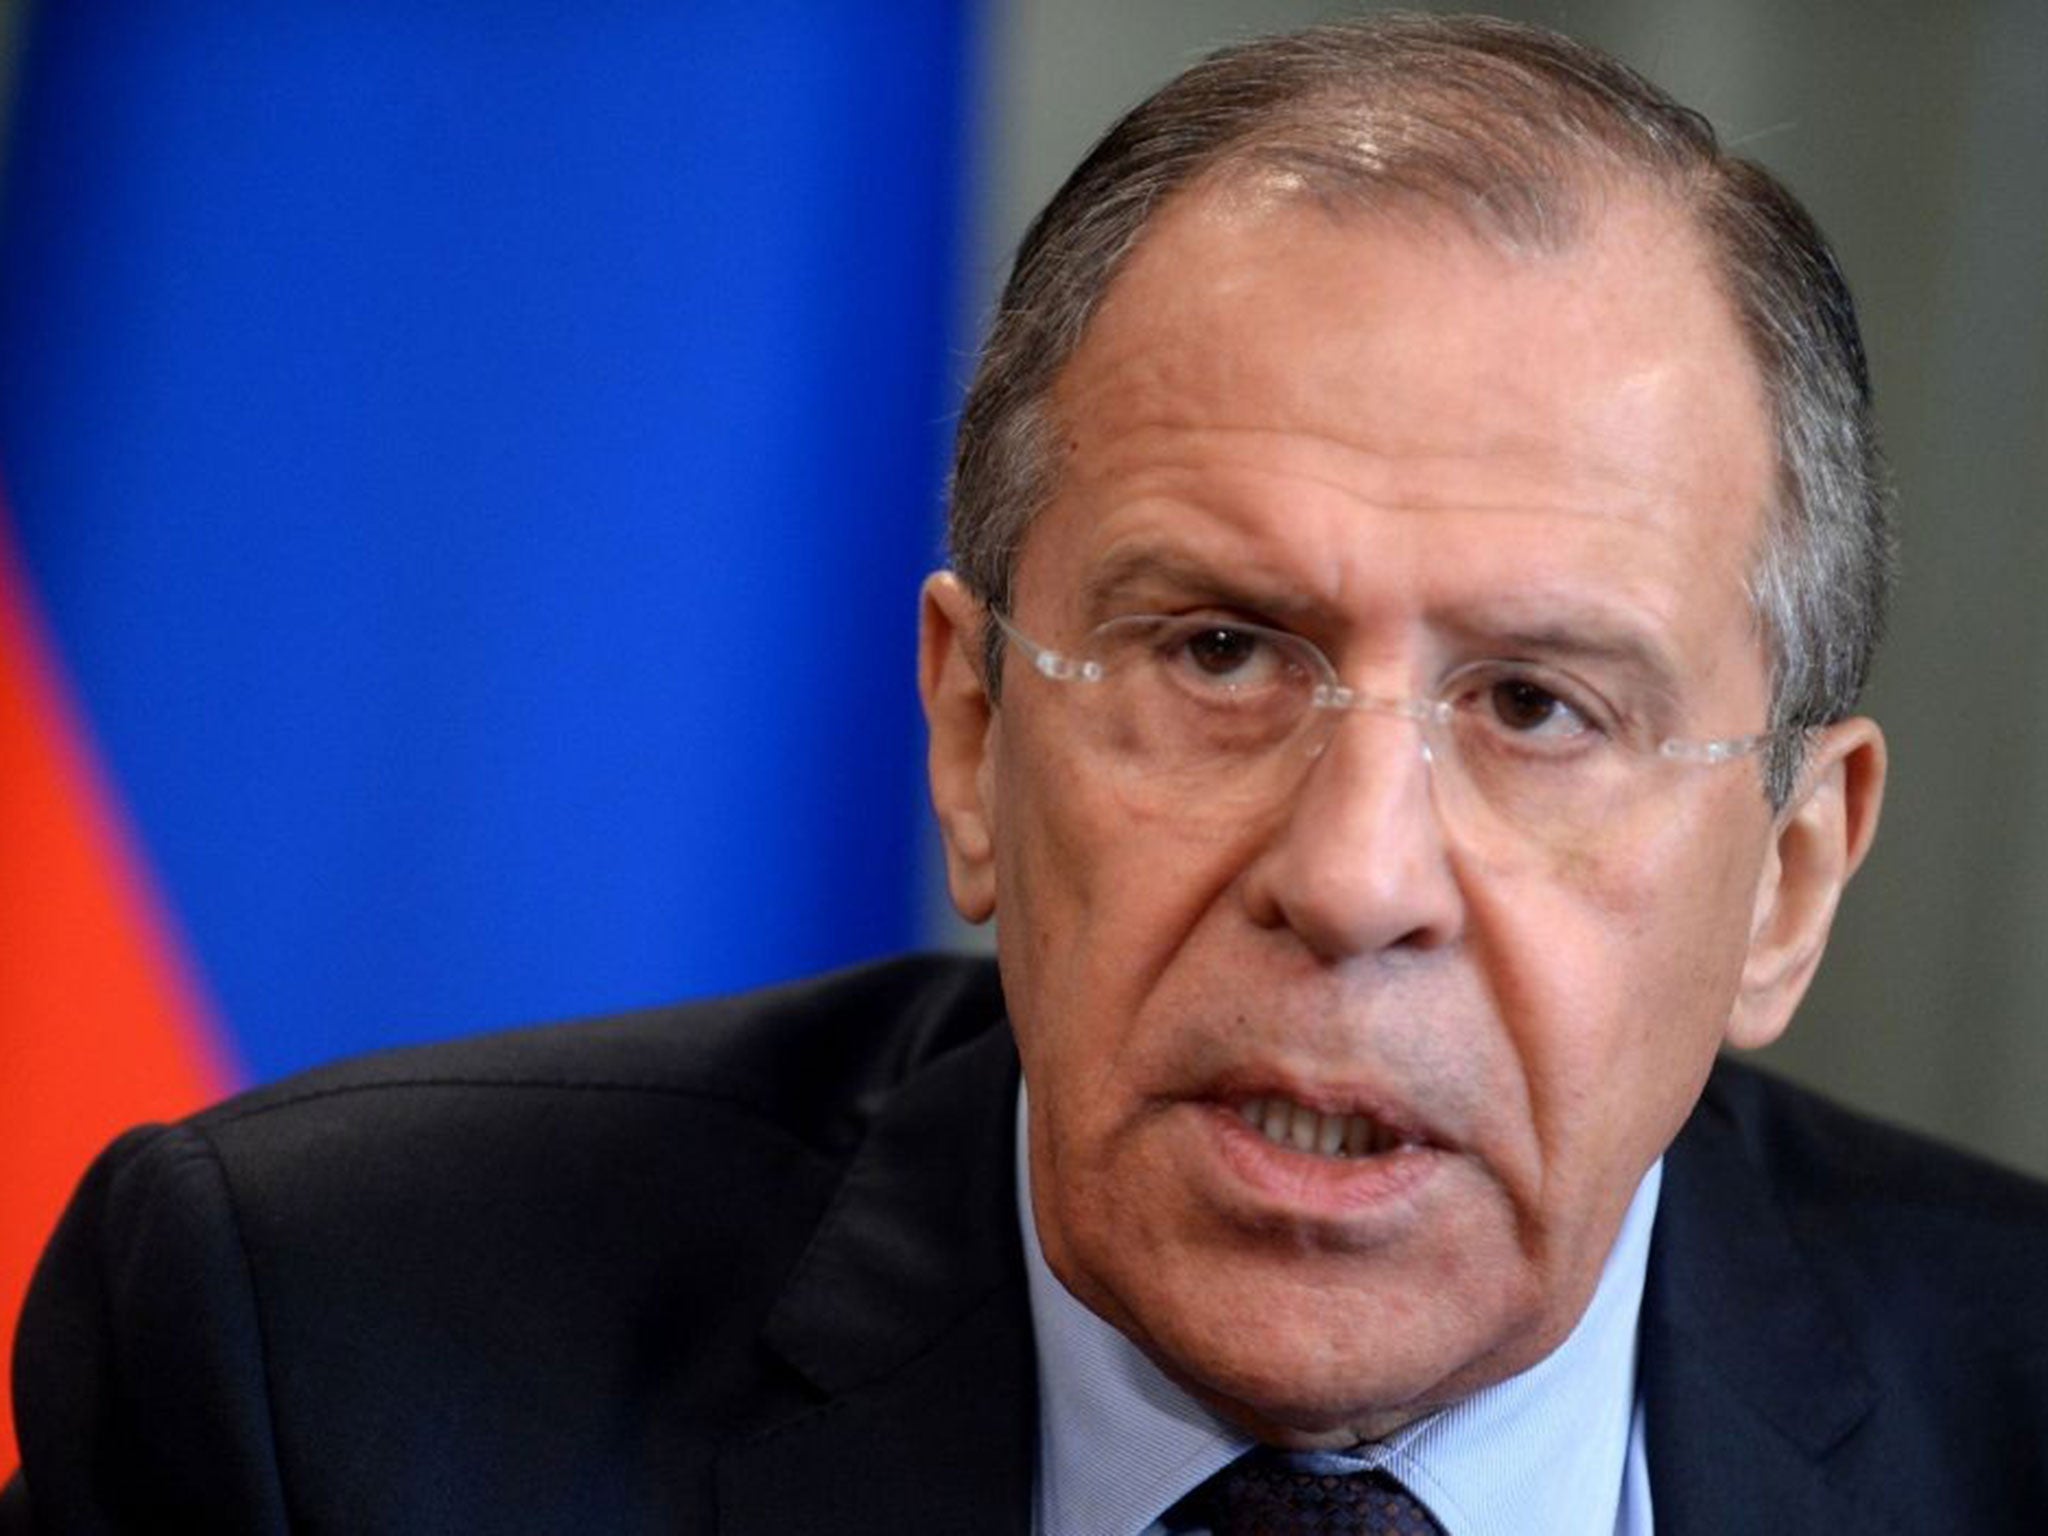 A Russian government statement revealed that Foreign Minister Sergei Lavrov had discussed co-operation over Ukraine with US Secretary of State John Kerry